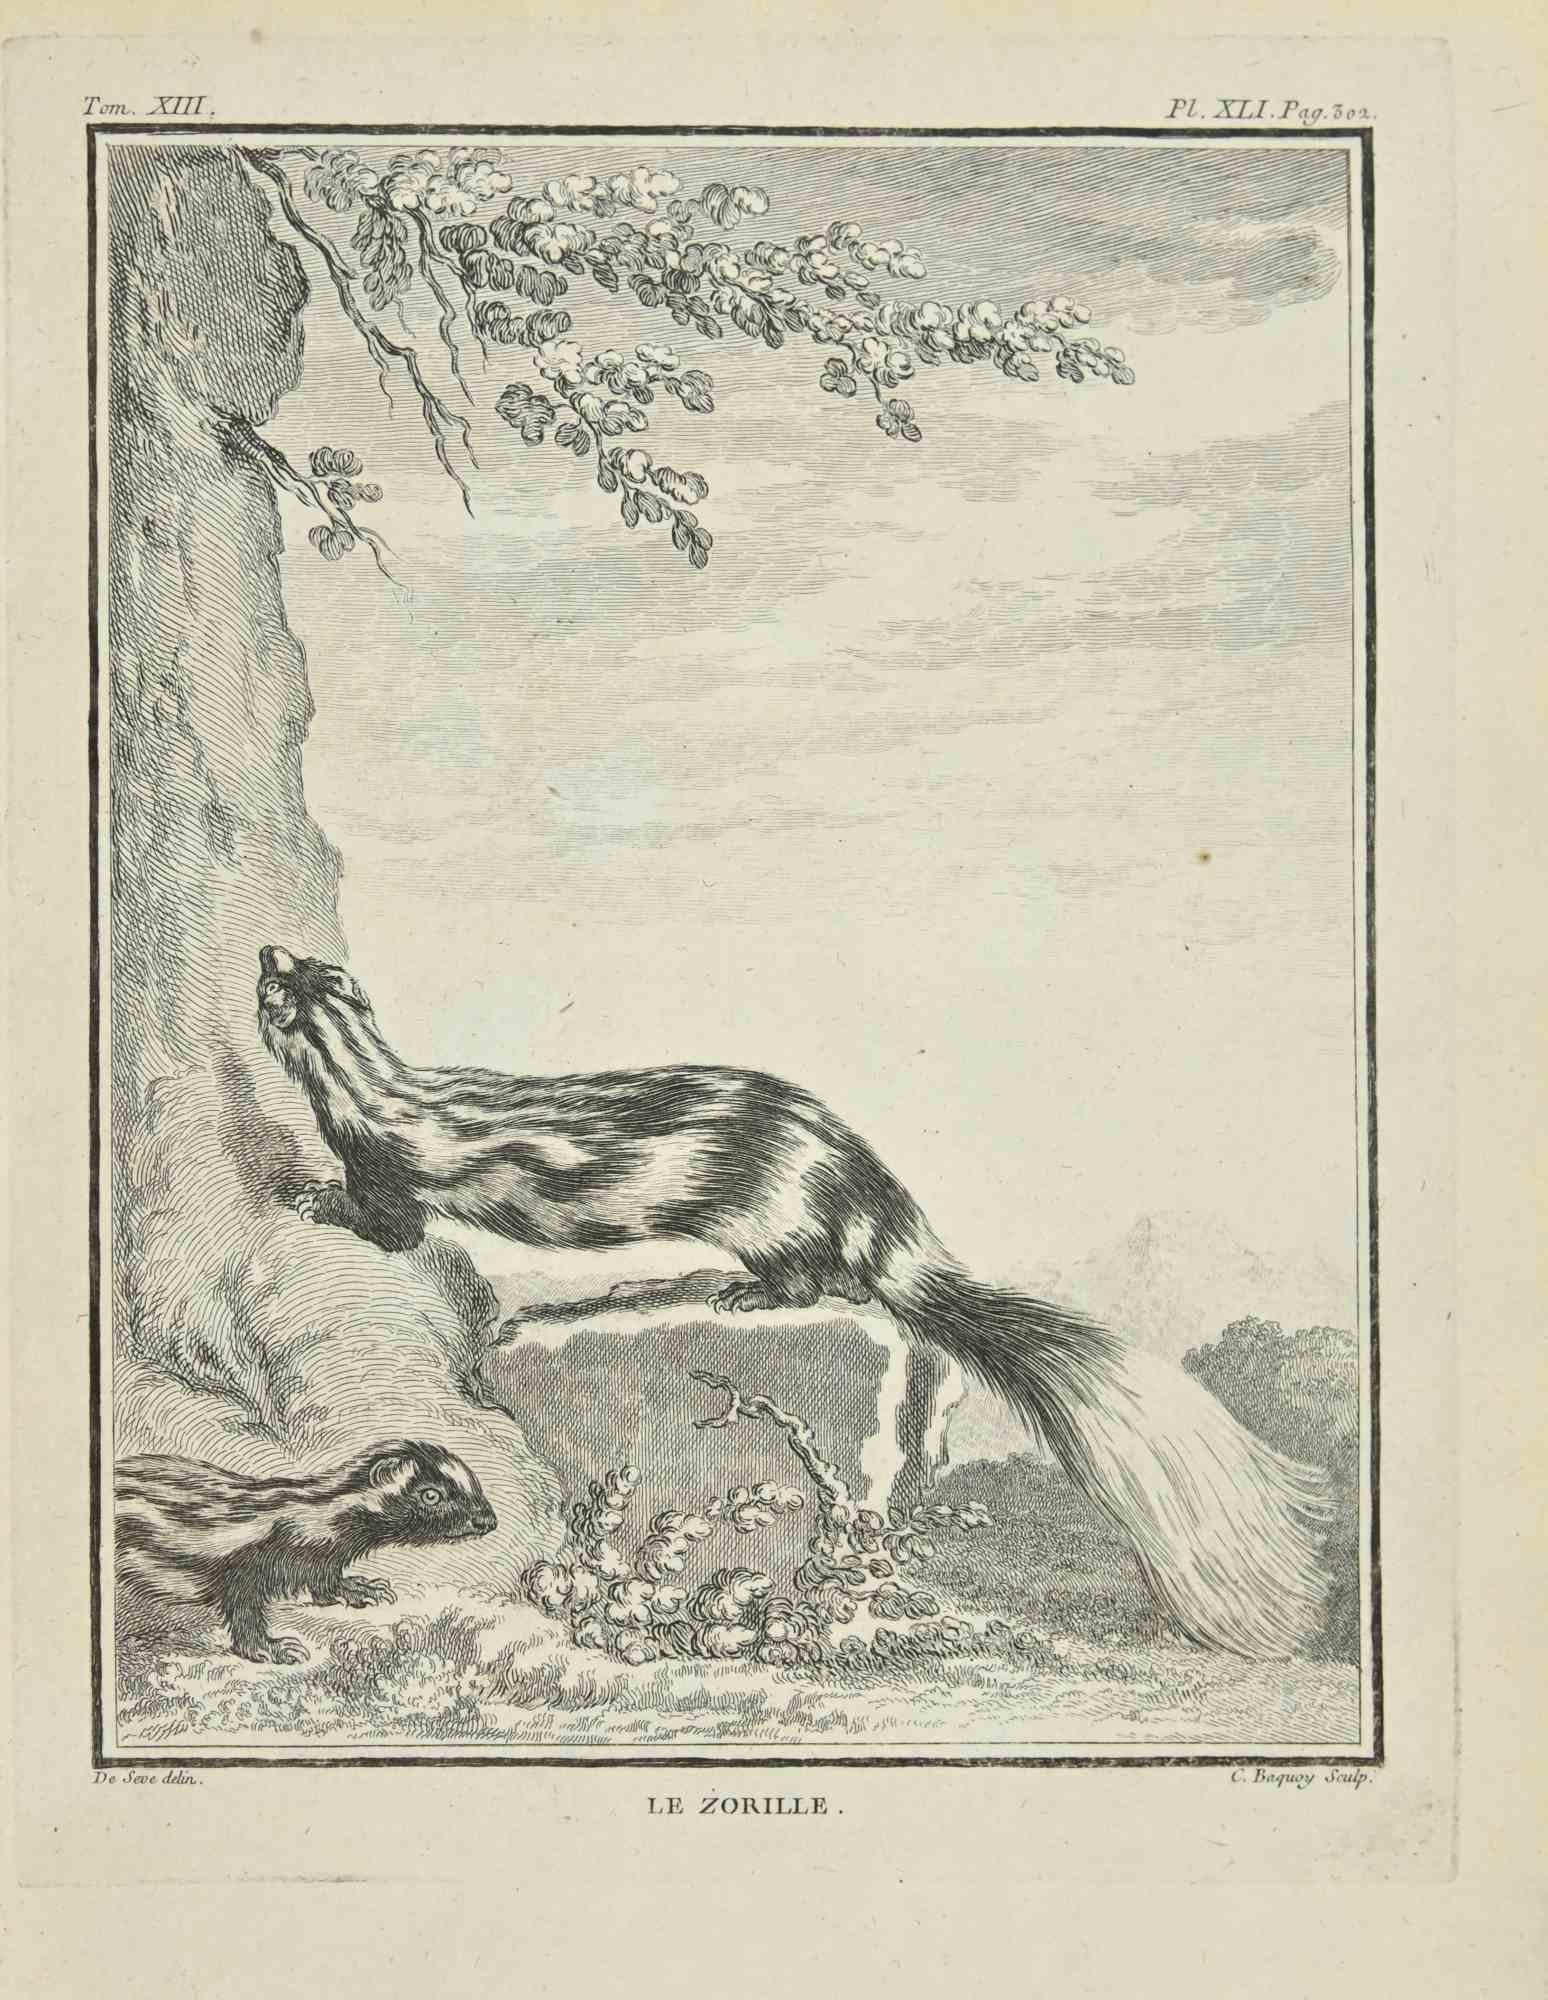 Le Zorille is an etching realized by Jean Charles Baquoy in 1771.

It belongs to the suite "Histoire Naturelle de Buffon".

The Artist's signature is engraved lower right.

Good conditions.